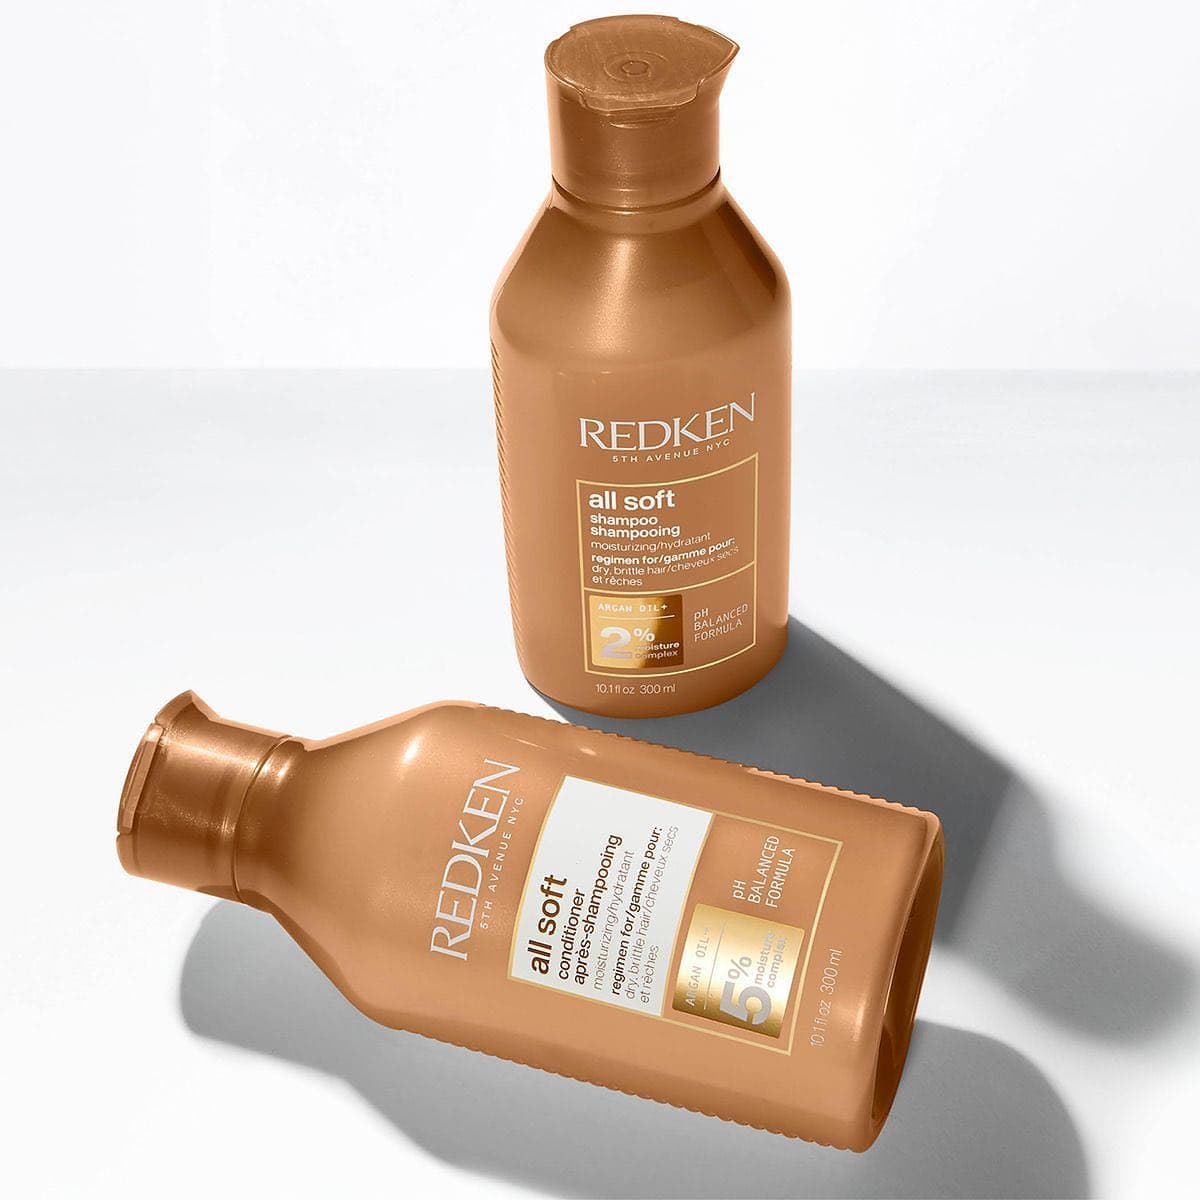 bottles of redken all soft shampoo and conditioner